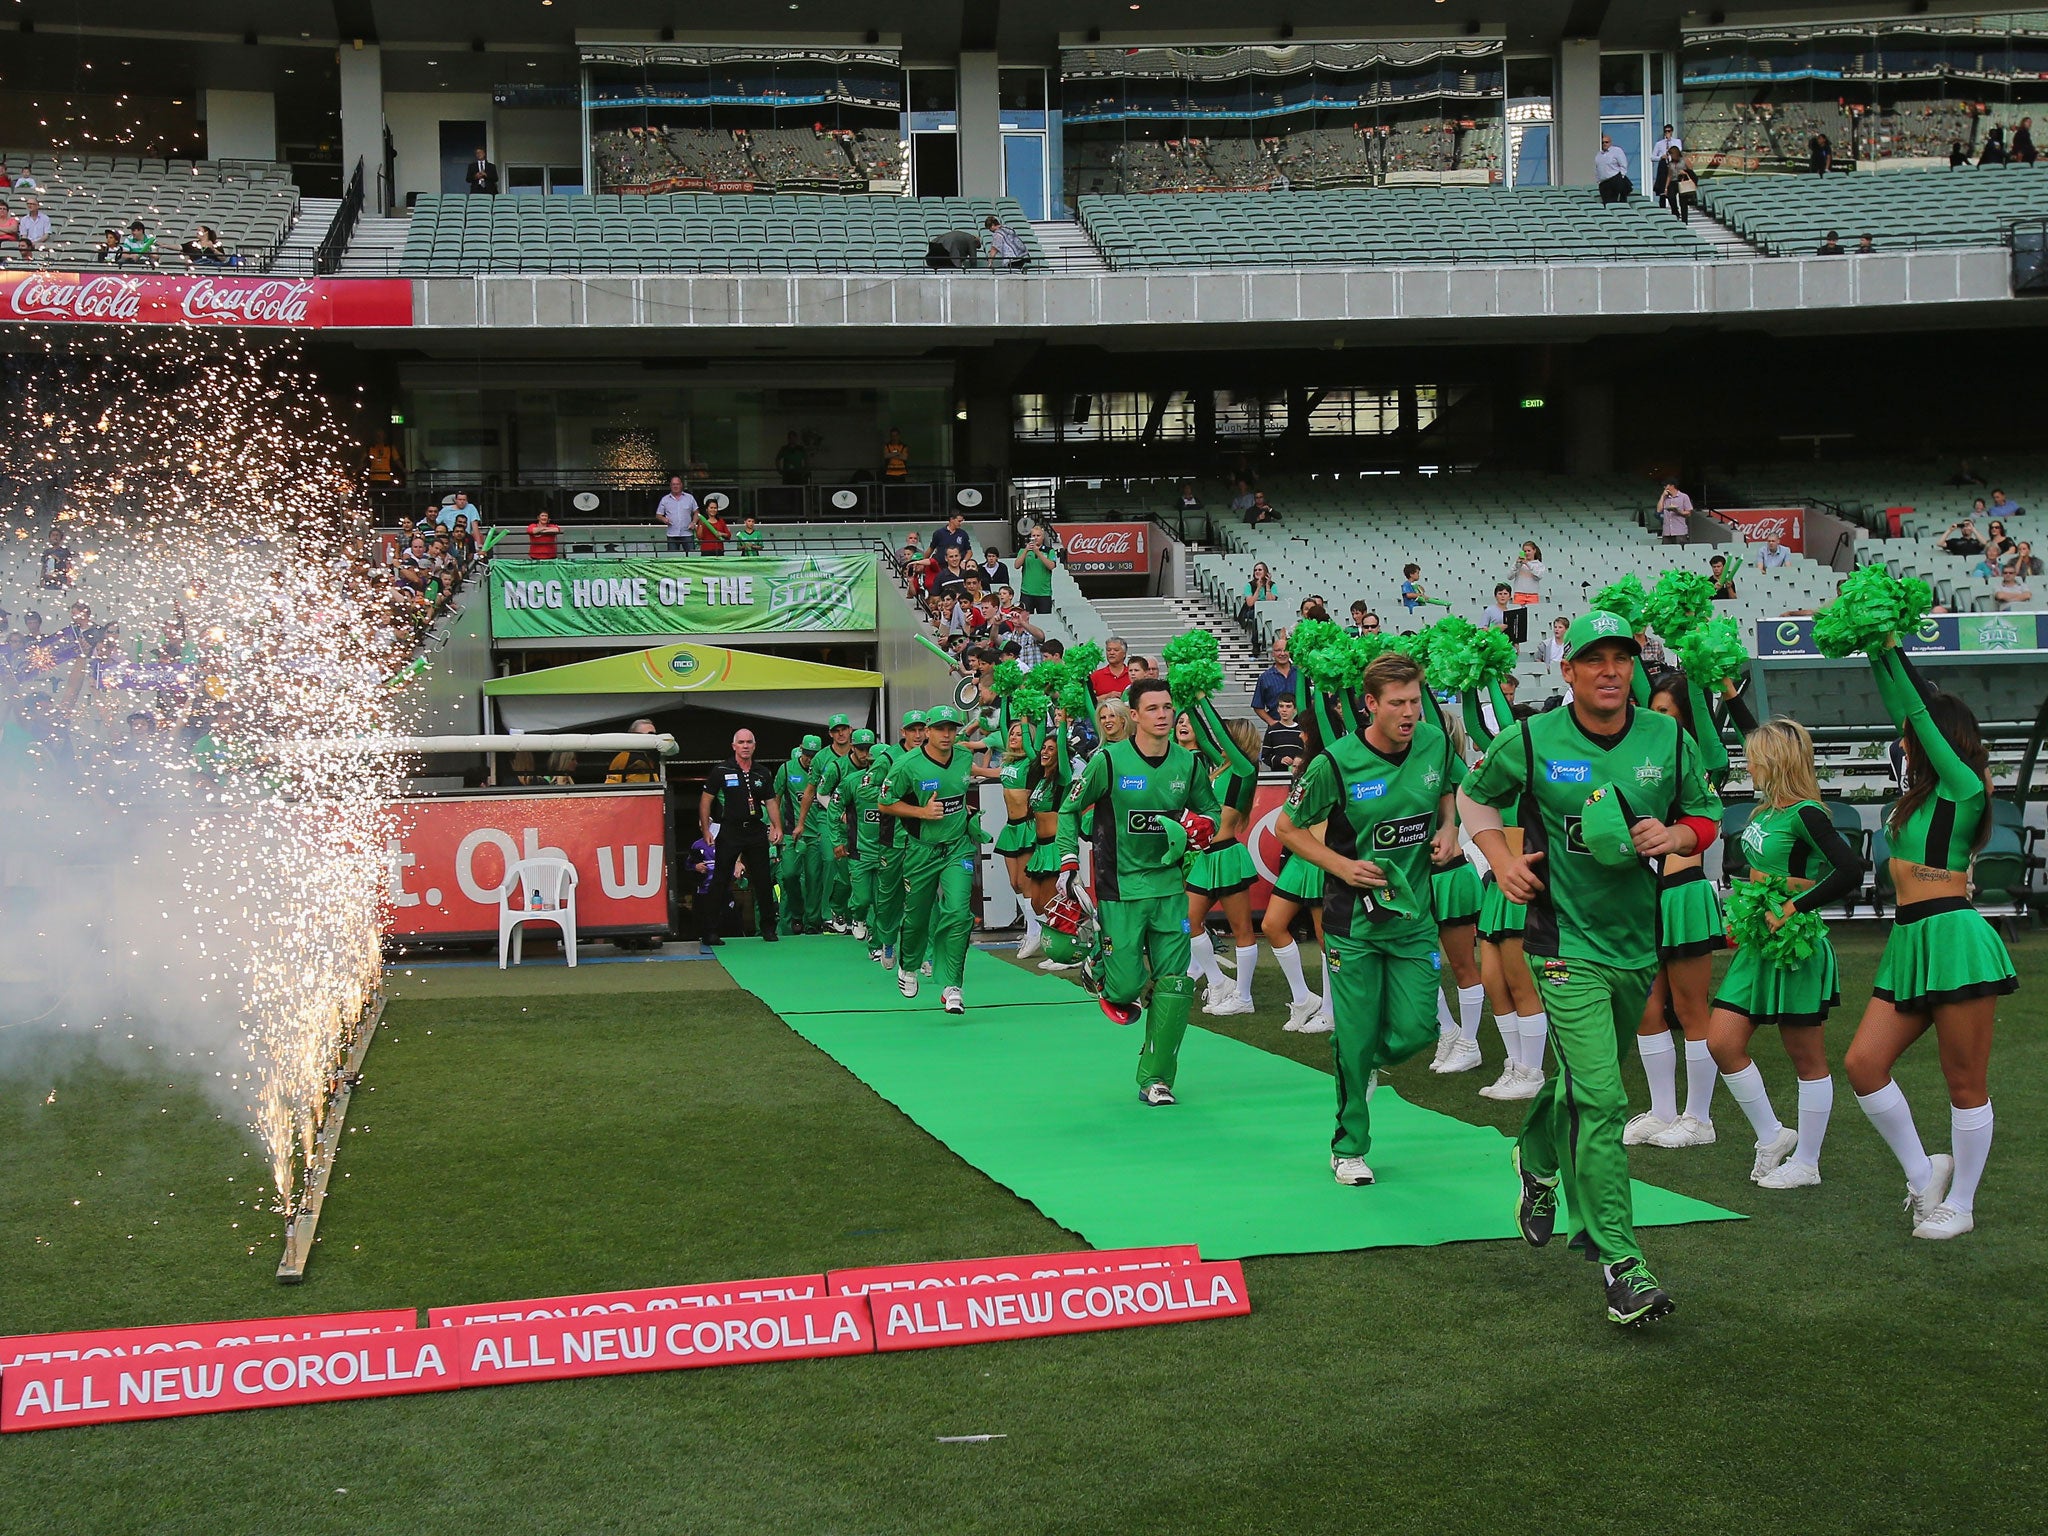 Shane Warne leads the Melbourne Stars on to the field during his Big Bash days